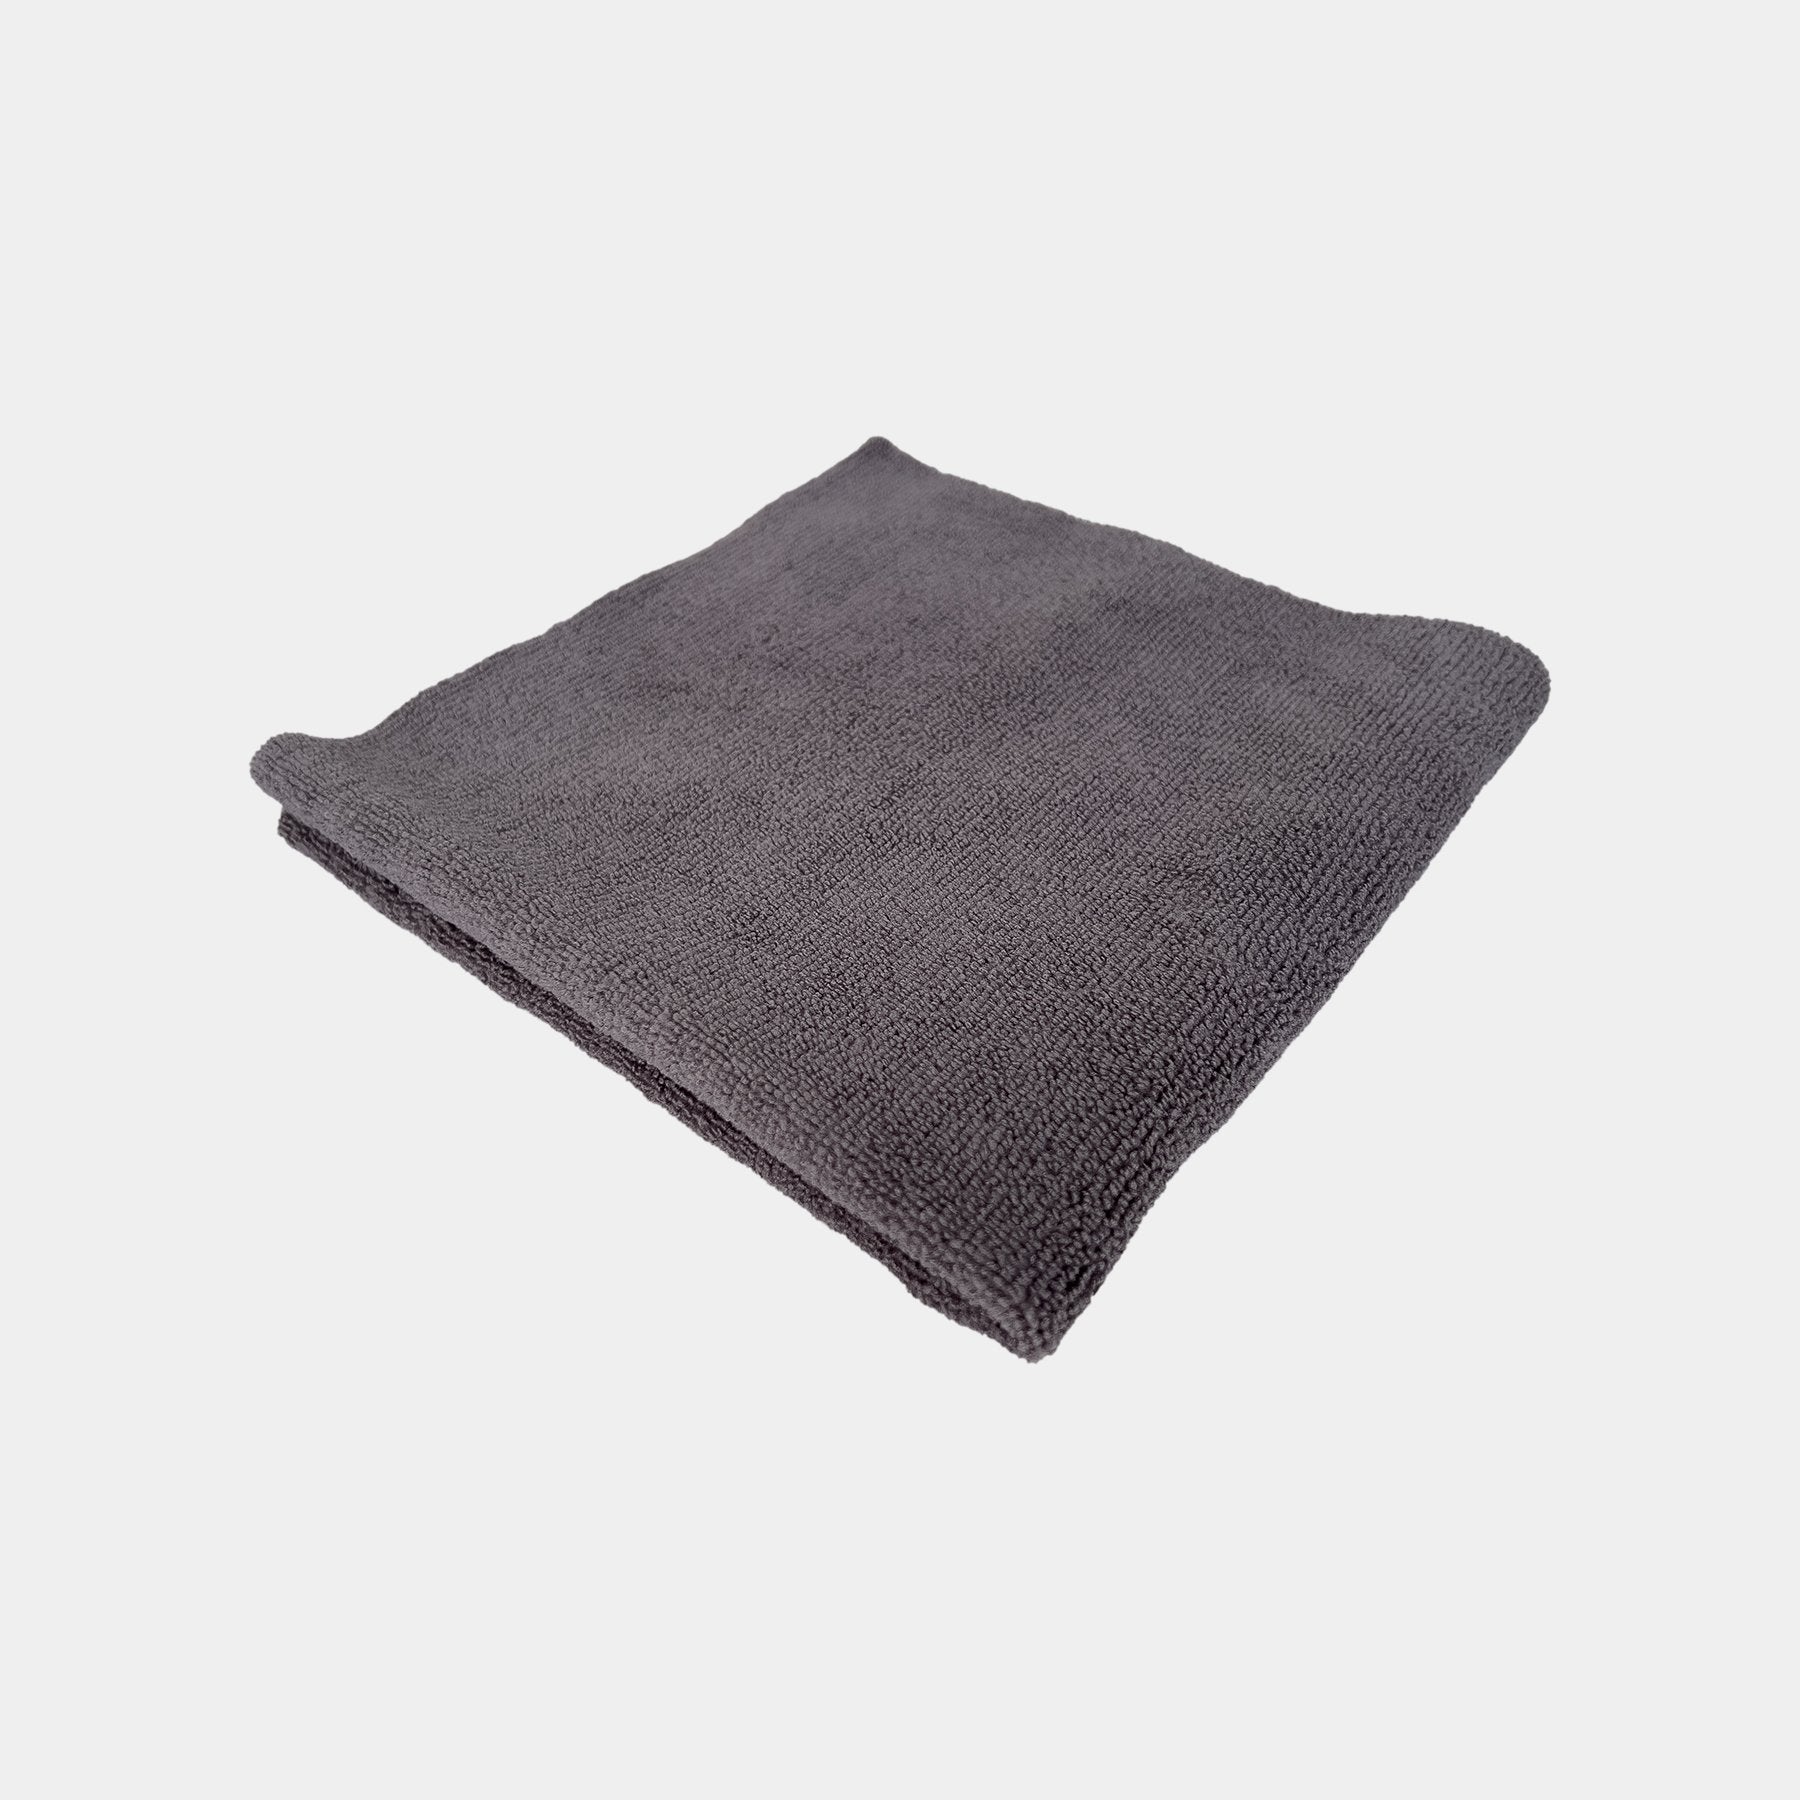 Car care microfibre grey cloth 40x40cm displayed on a white background.